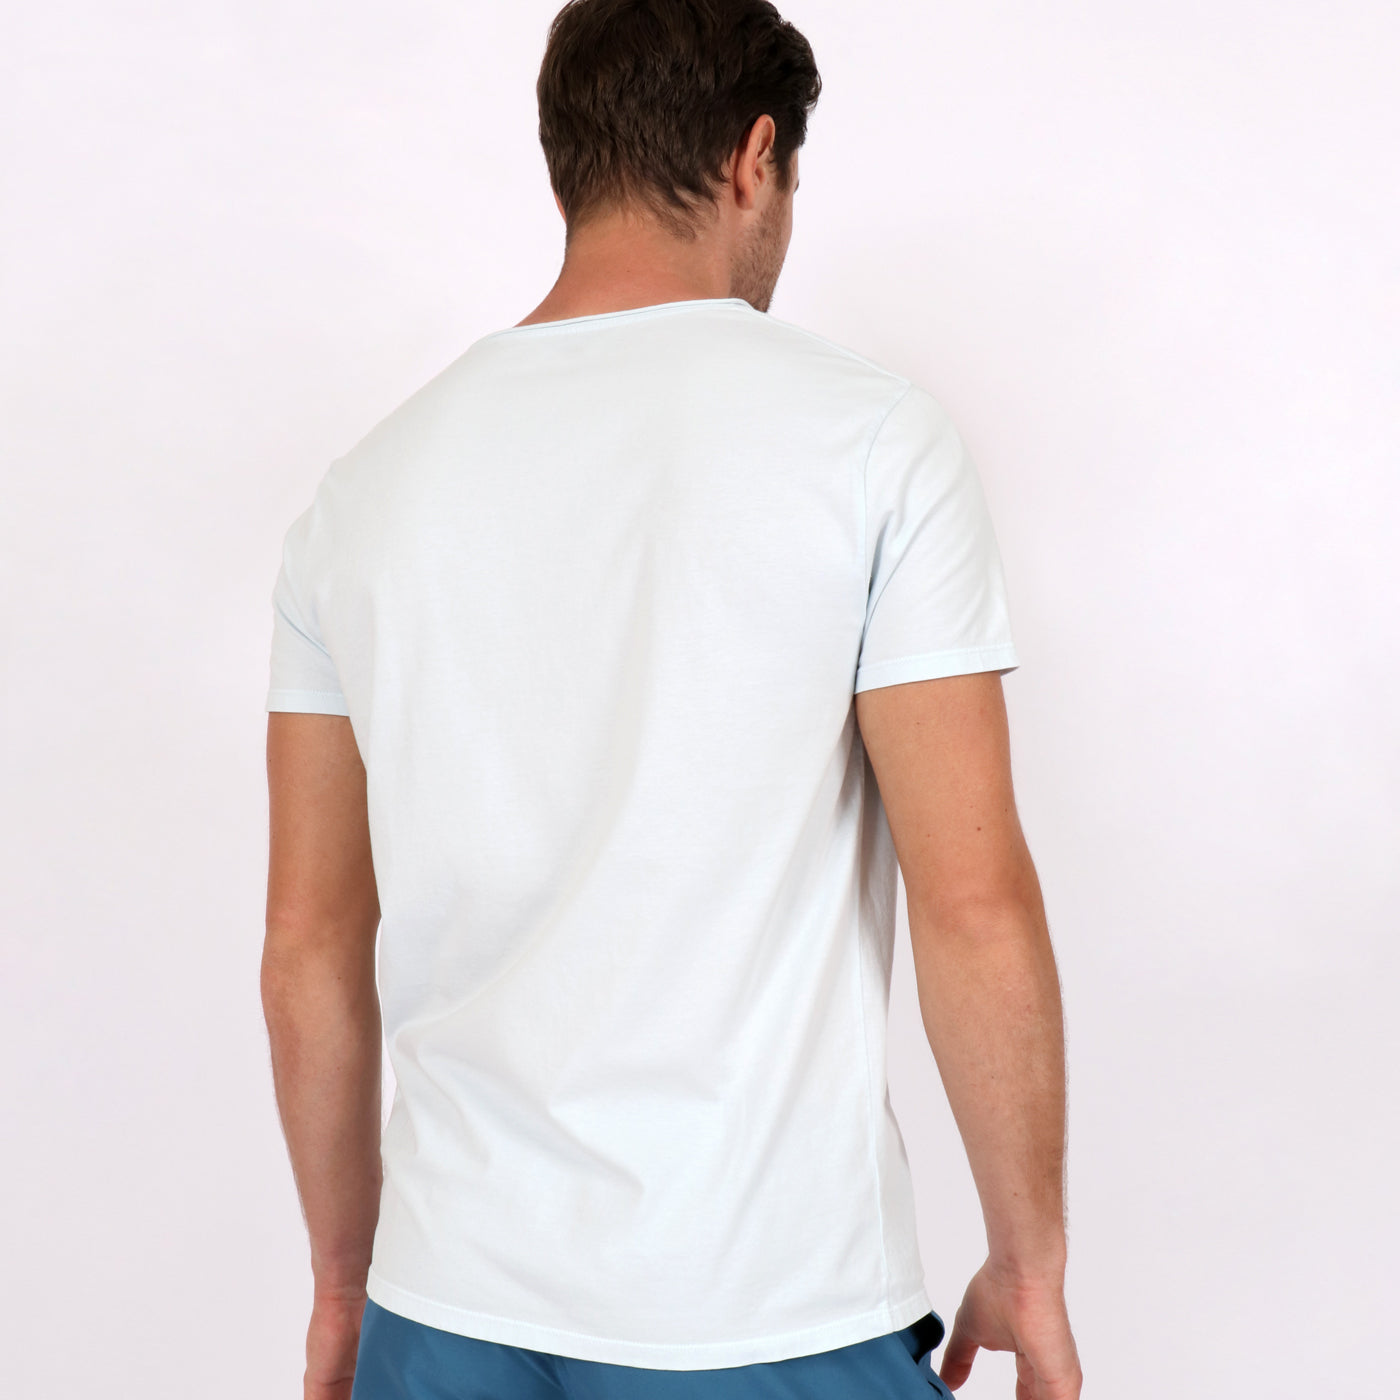 OWTS1804 Ice Blue garment dyed beach fit men's organic cotton t-shirt with chest pocket detail on body back view